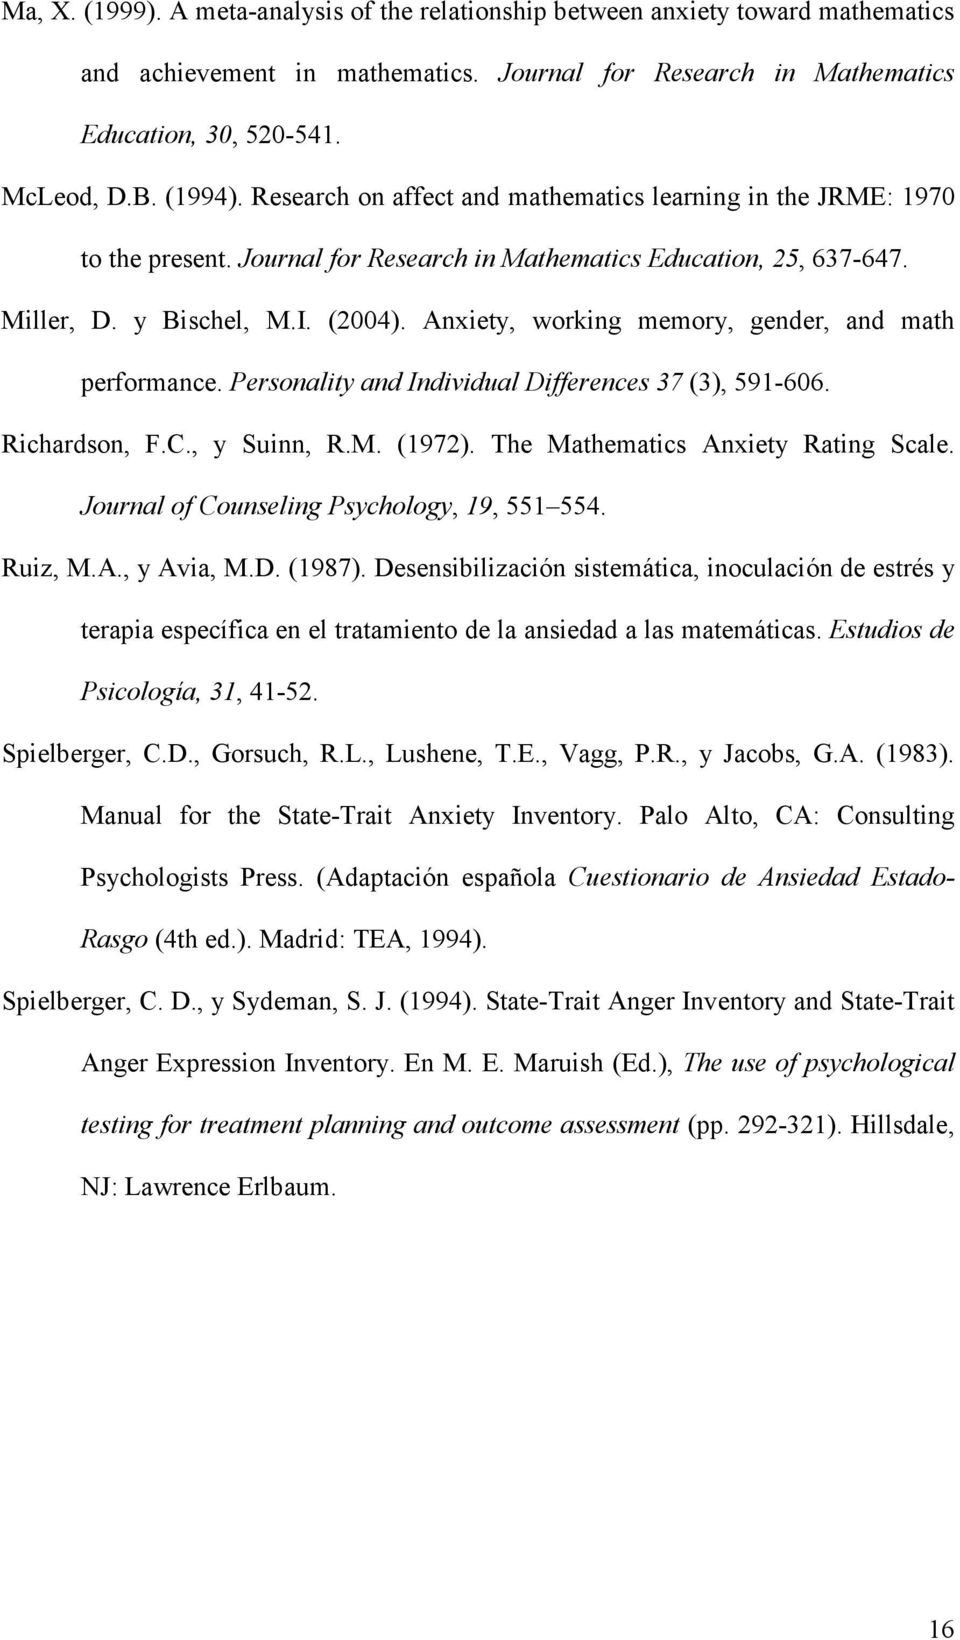 Anxiety, working memory, gender, and math performance. Personality and Individual Differences 37 (3), 591-606. Richardson, F.C., y Suinn, R.M. (1972). The Mathematics Anxiety Rating Scale.